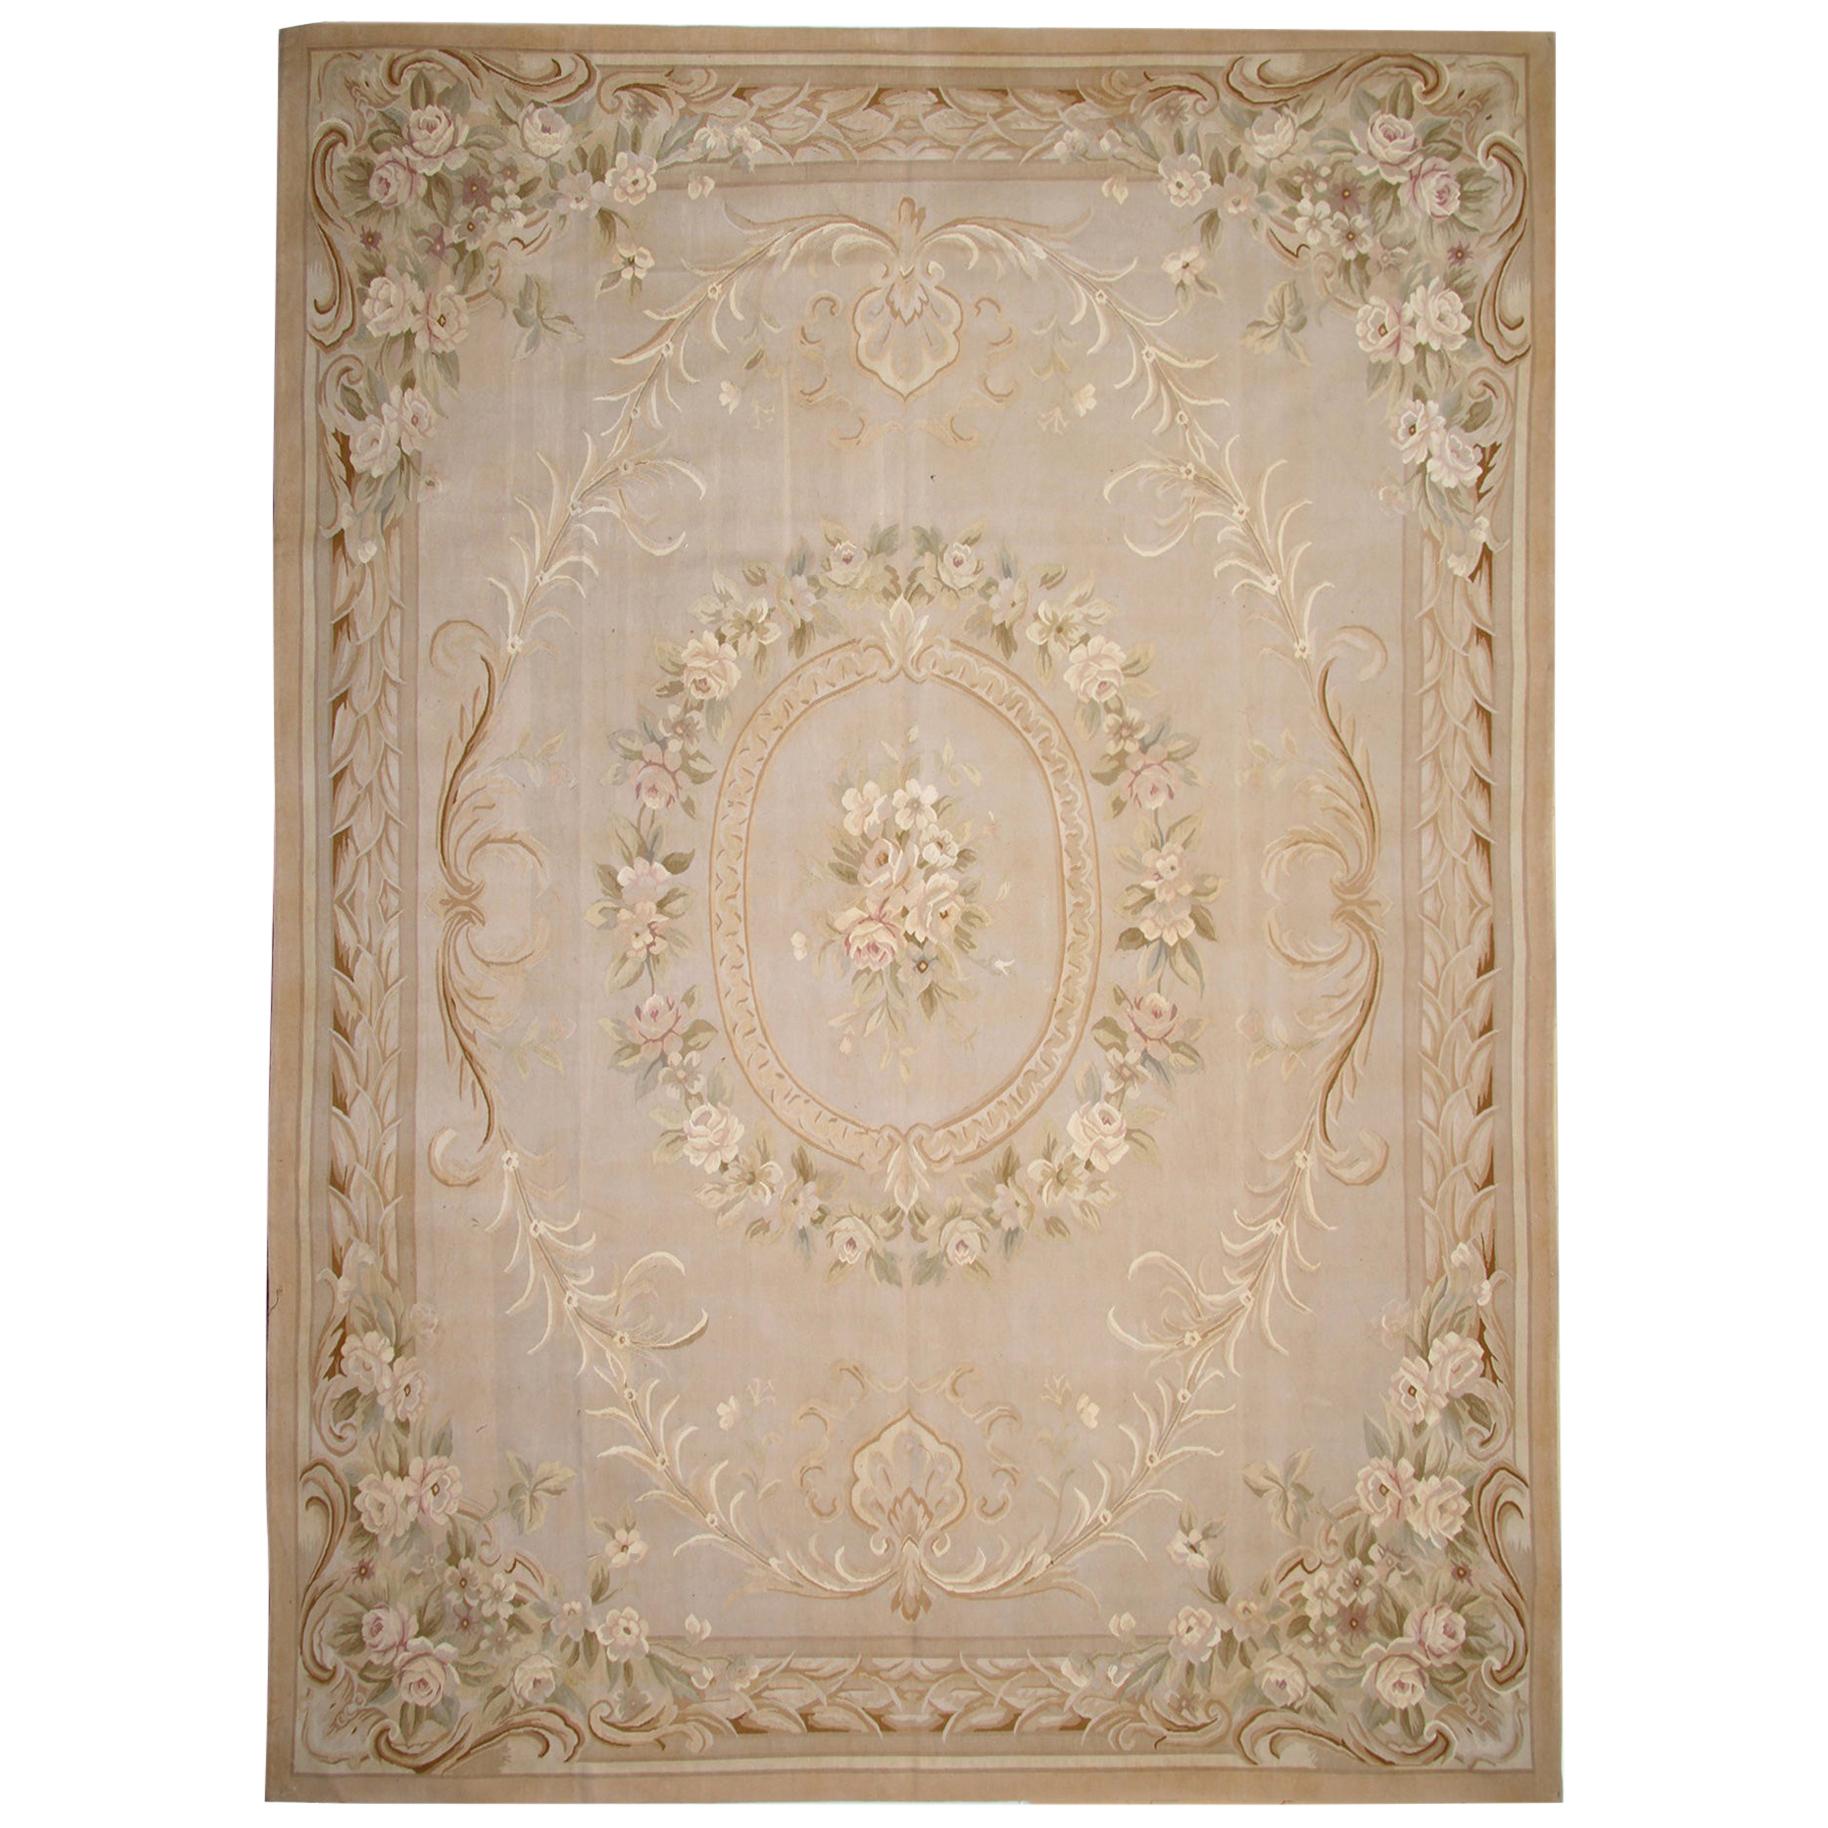 Traditional Aubusson Style Rug Tapestry Area Rug Handwoven Wool